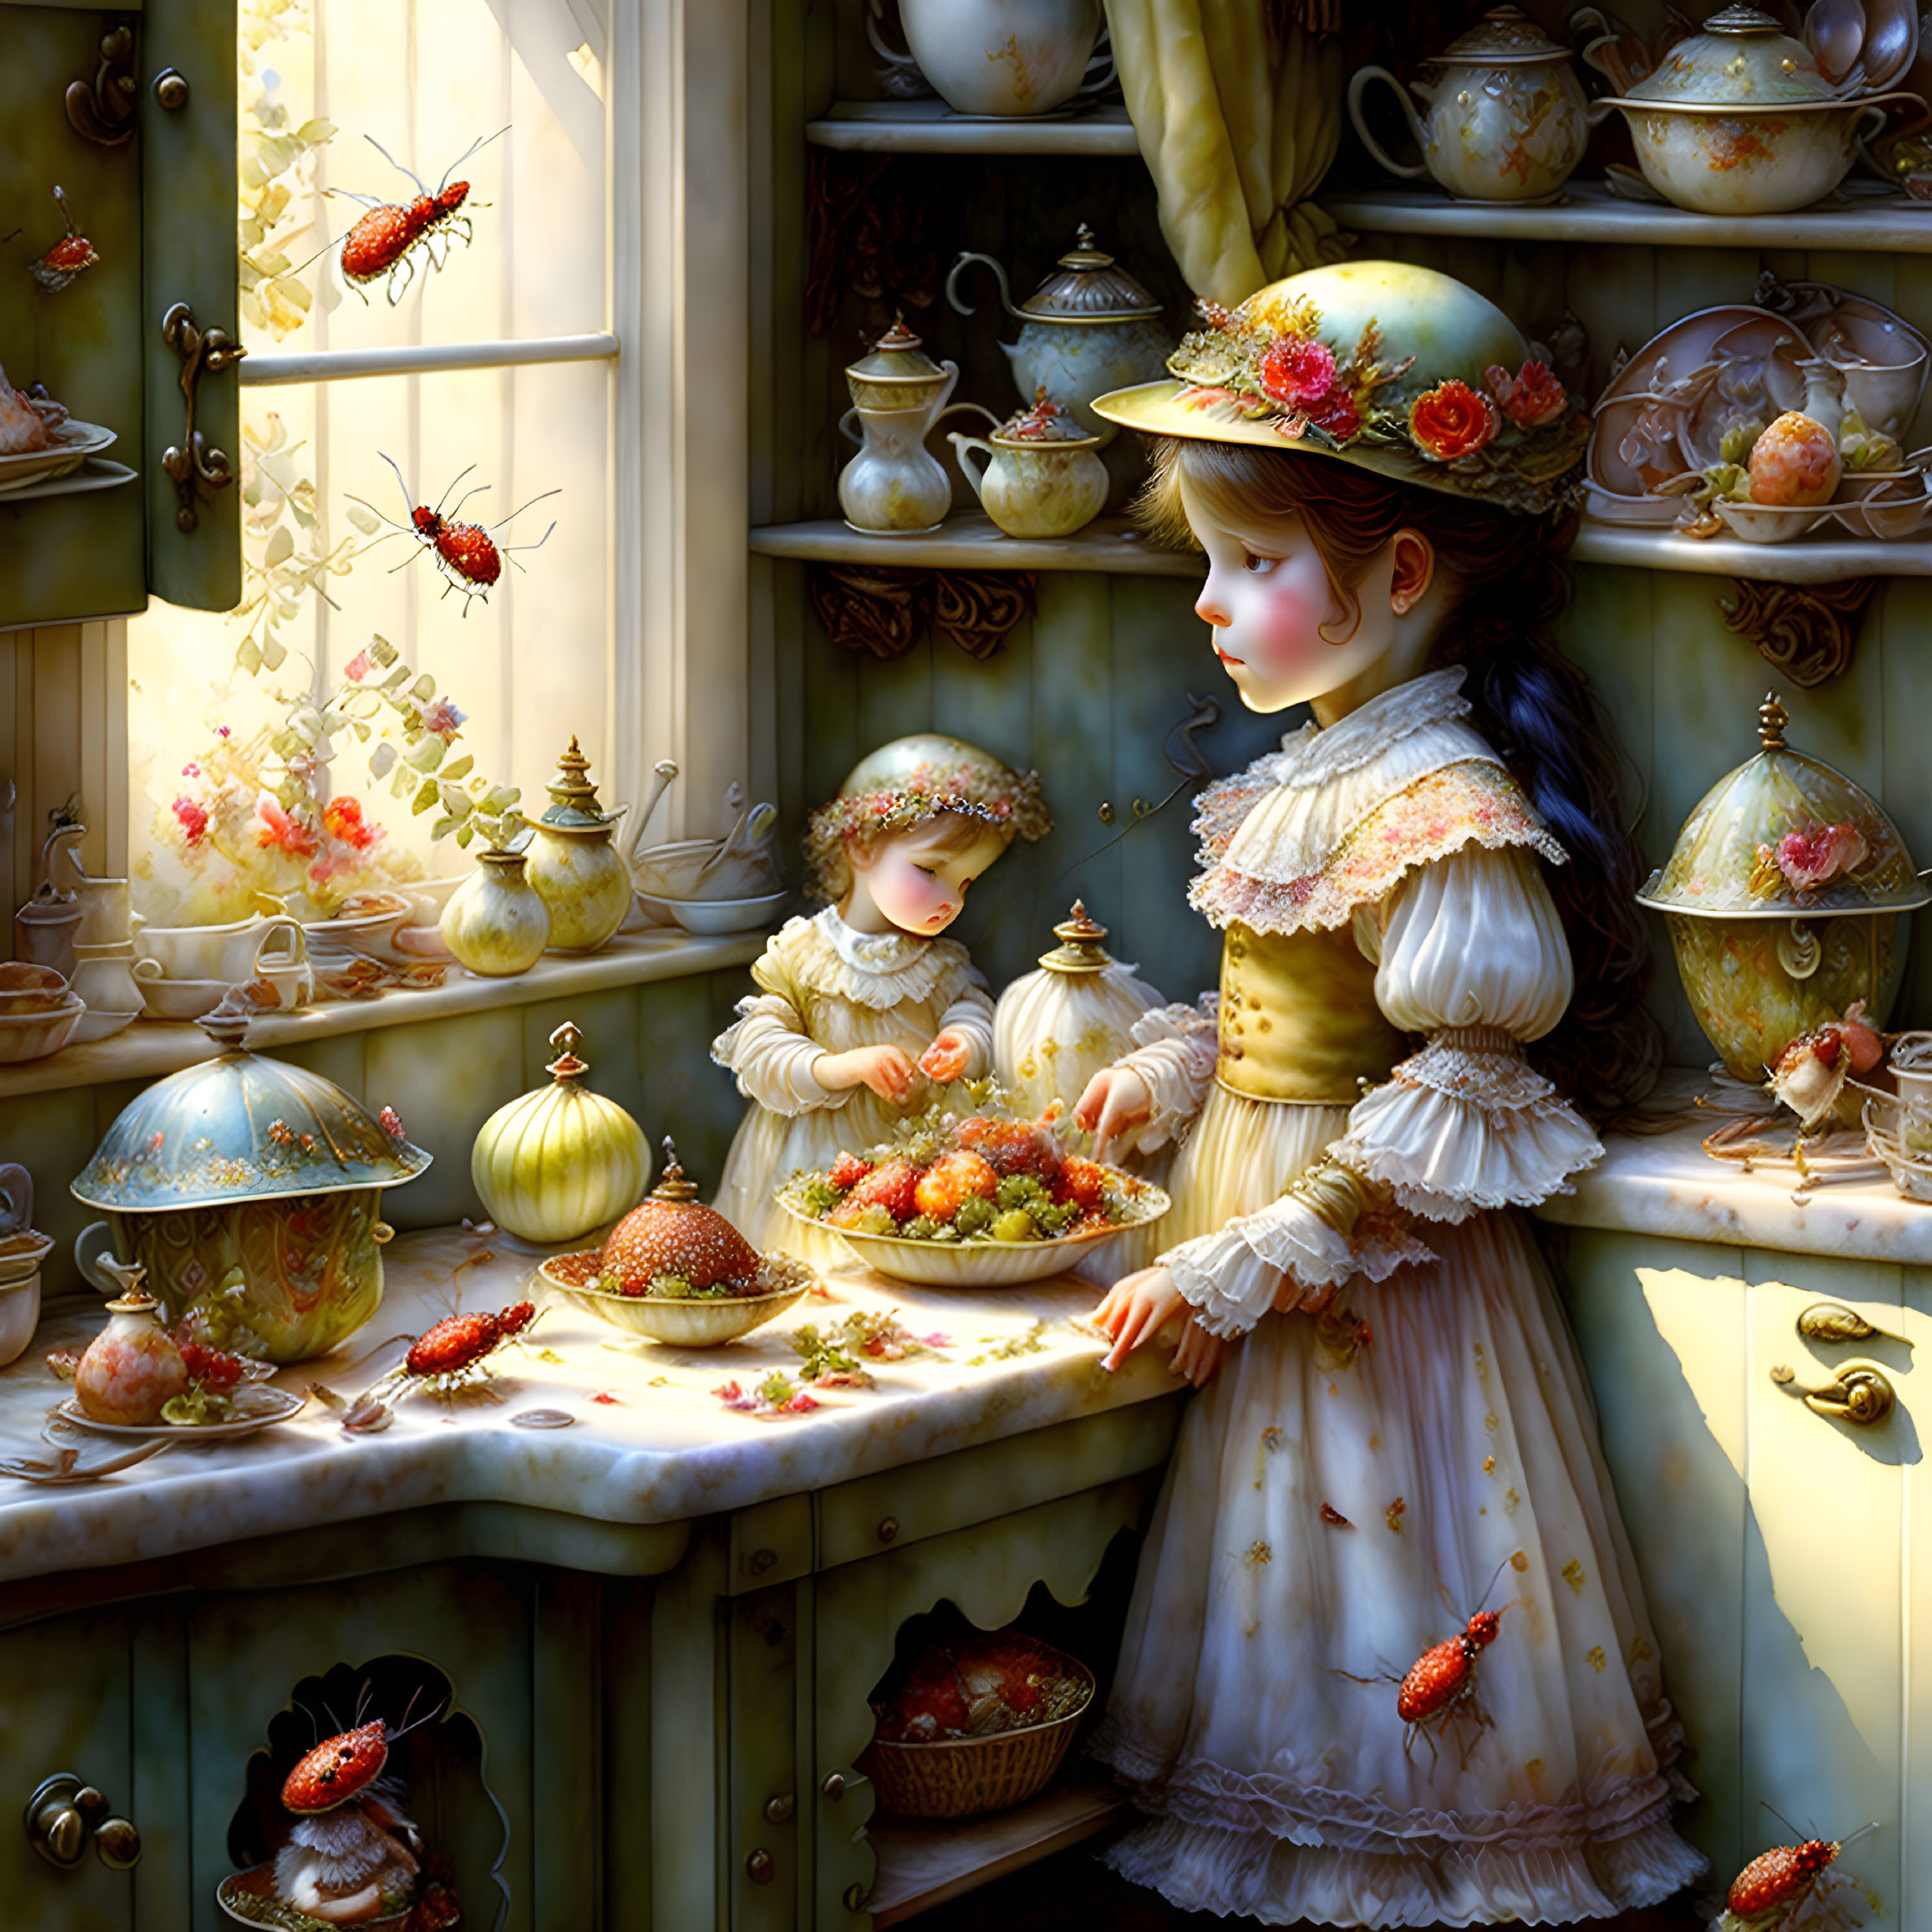 Stylized children in vintage attire with colorful strawberries in whimsical kitchen